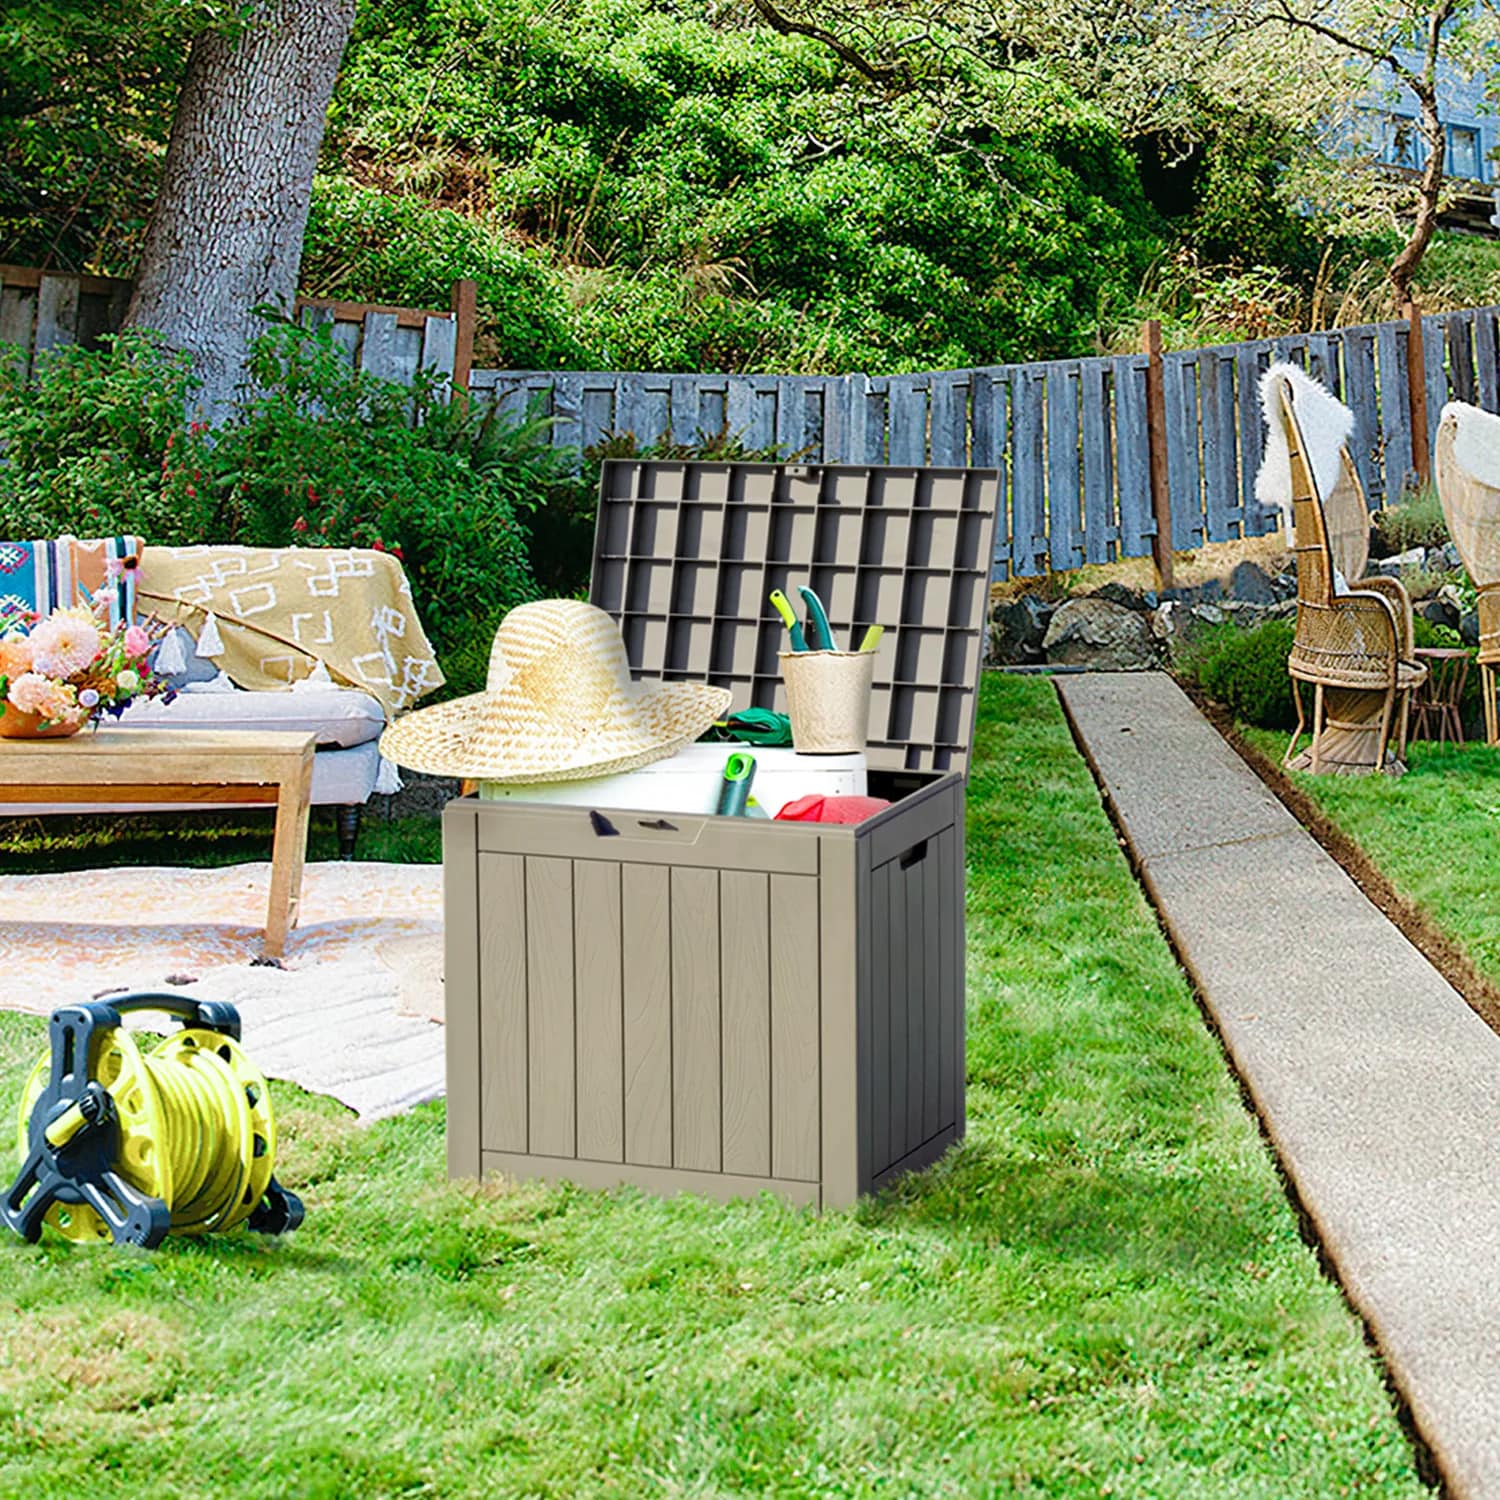 260 Gal Patio Resin Deck Box Waterproof Outdoor Storage Box Container Bench  US